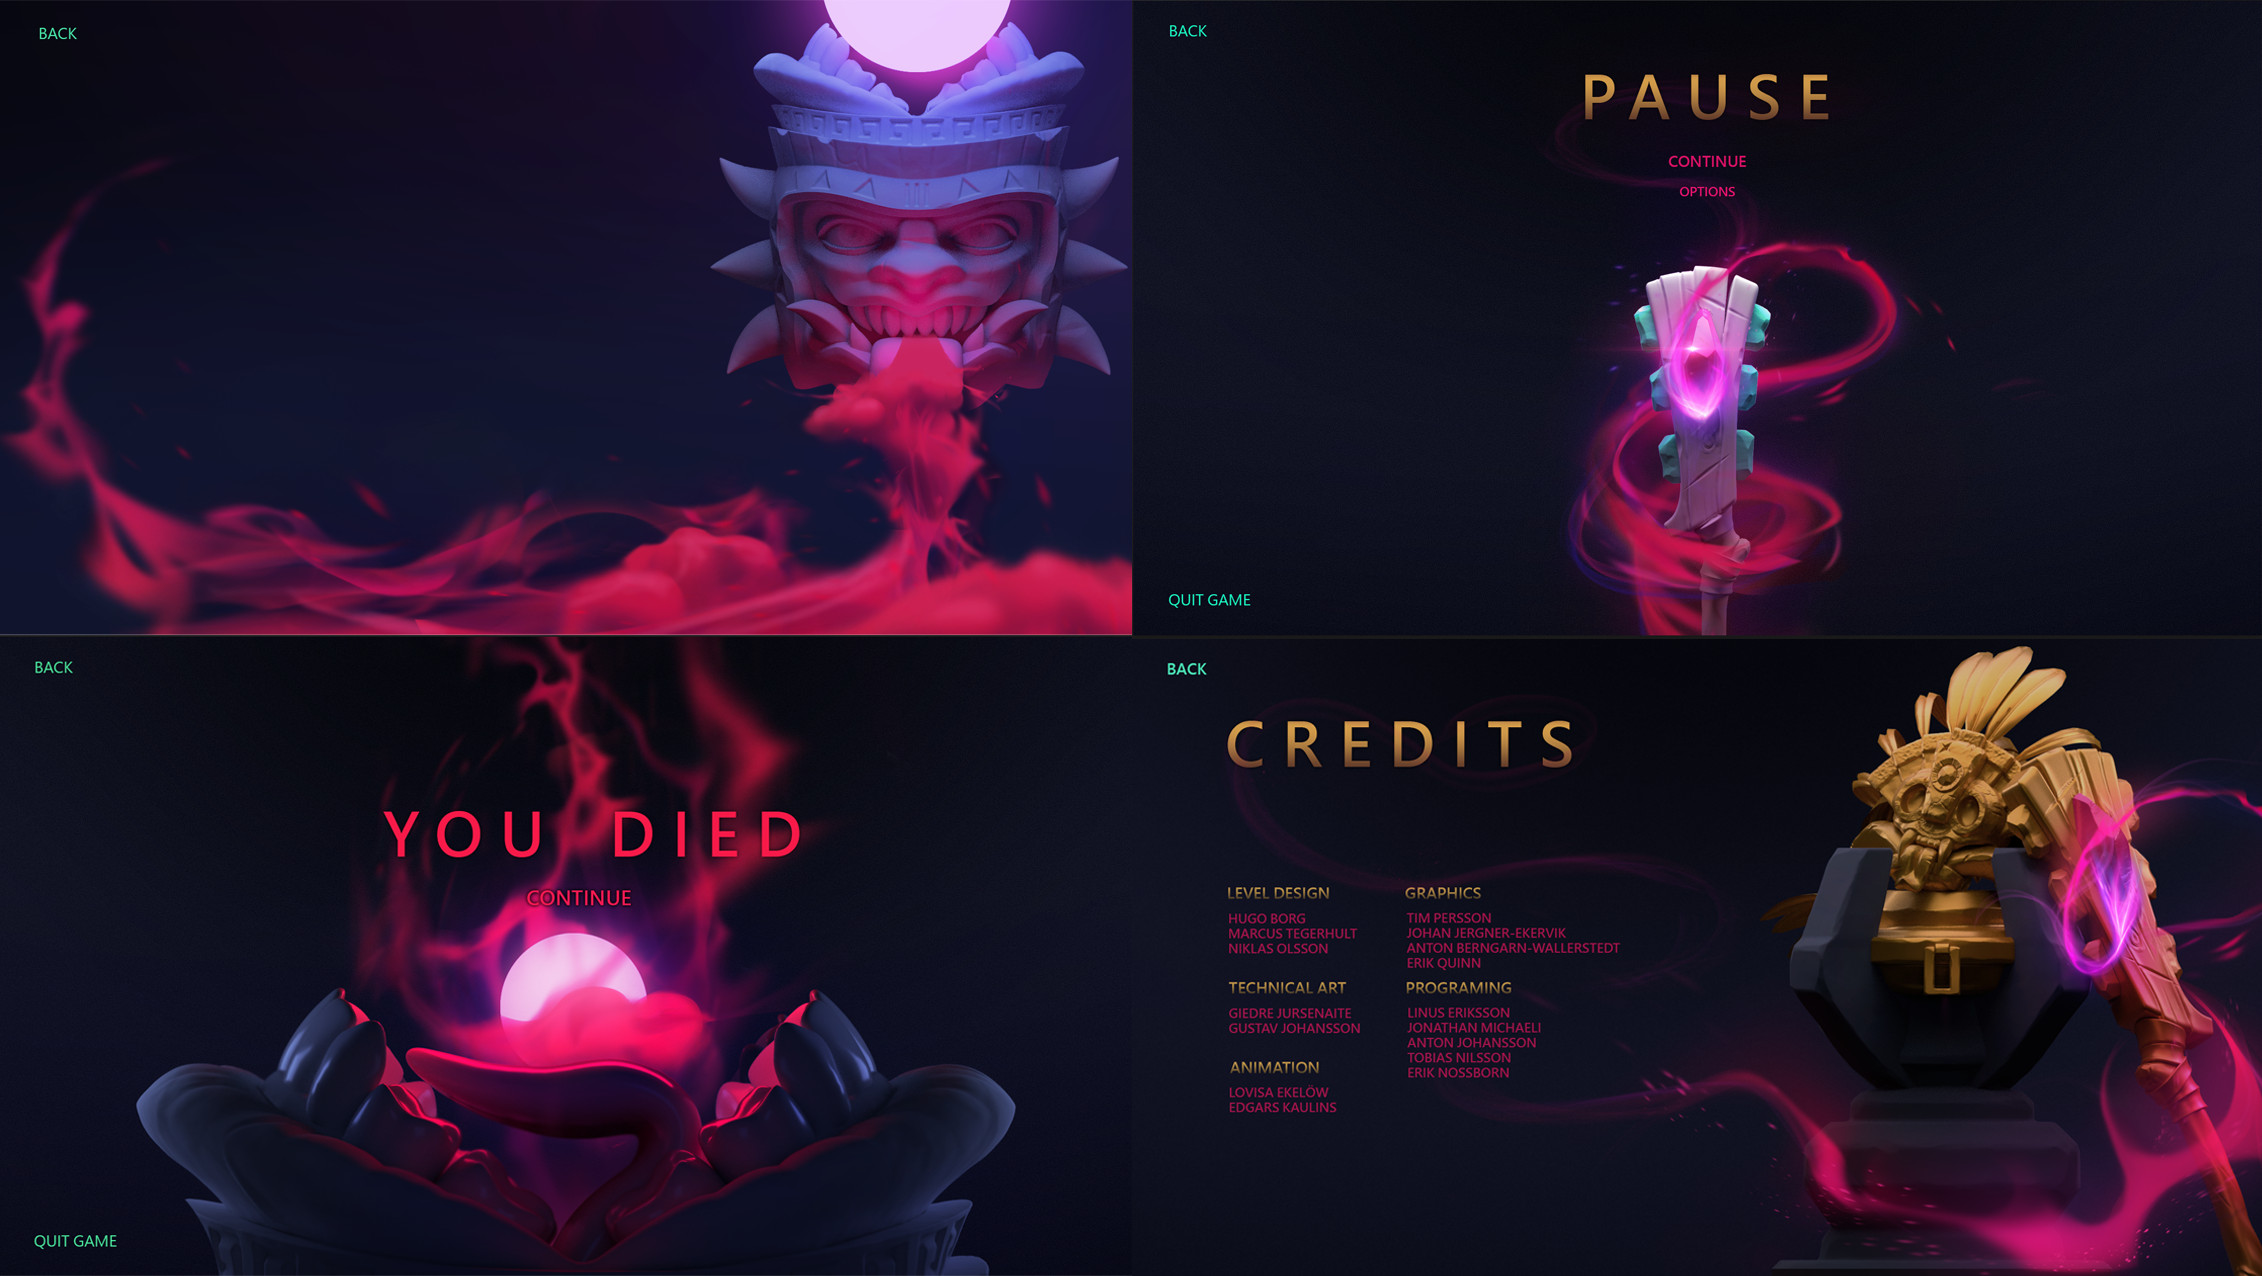 Game Menu Screens
Rendered and Paintover by me
Models Created by Anton Berngarn Wallerstedt (https://anton_berngarn-wallerstedt.artstation.com/albums/2915417)
